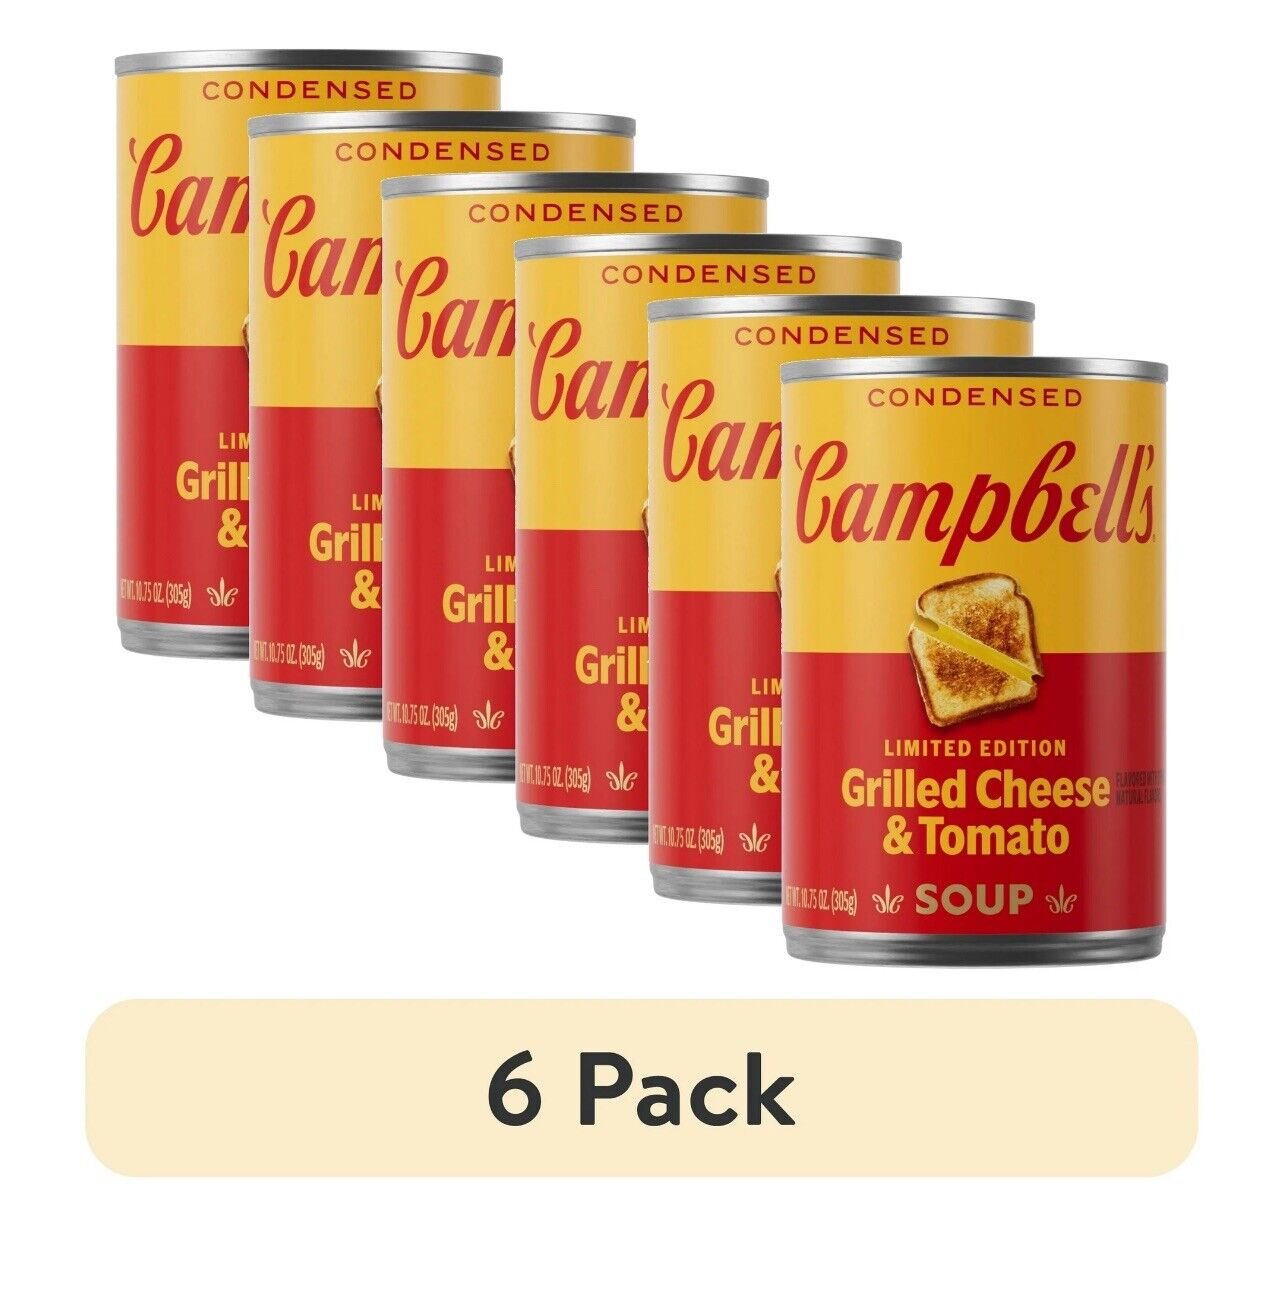 Campbells Grilled Cheese & Tomato Soup, 6 Cans, Limited Edition Six Total